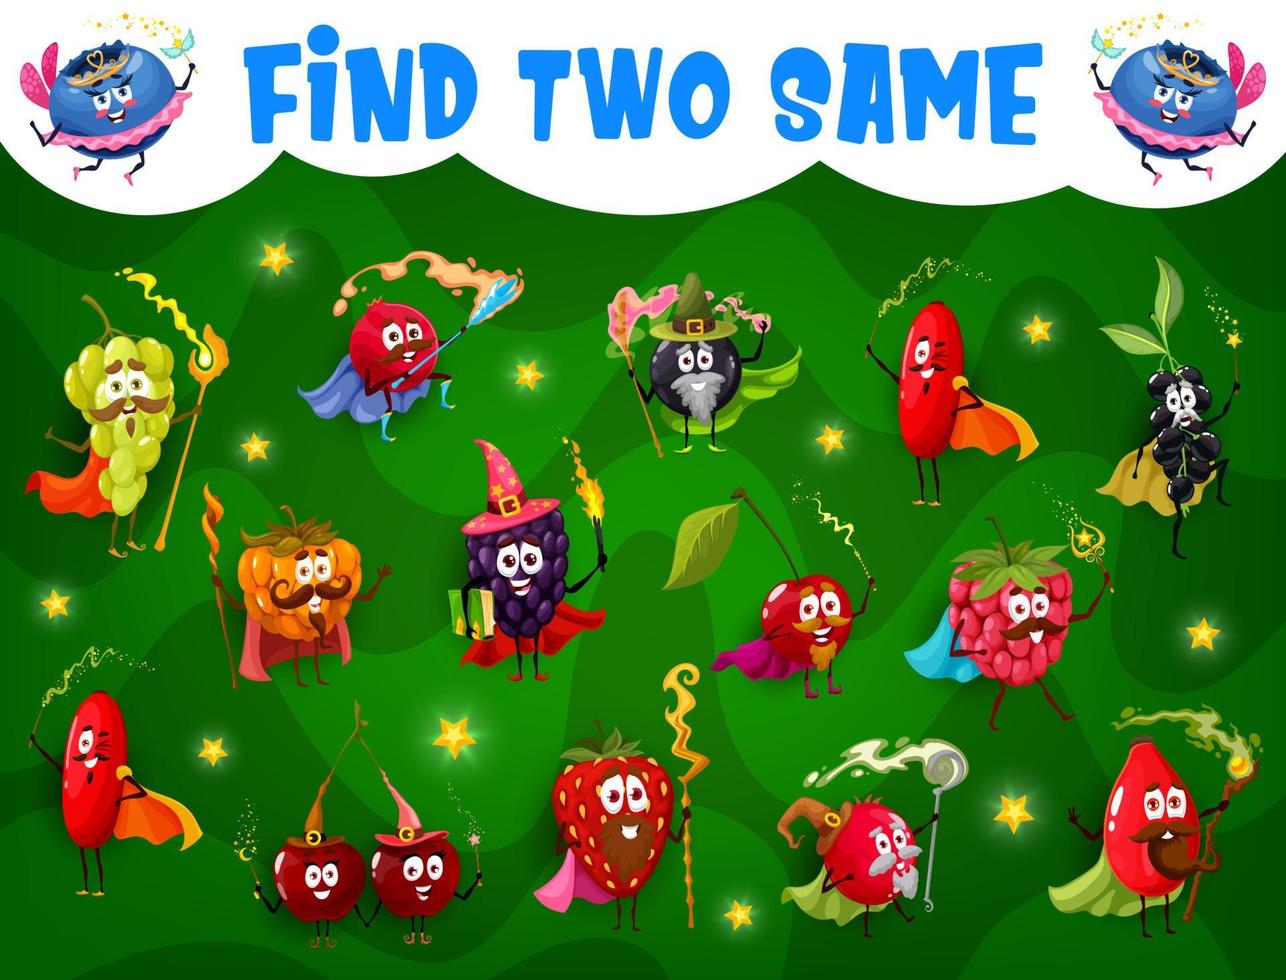 Find two same cartoon berry wizard, mage, fairy vector